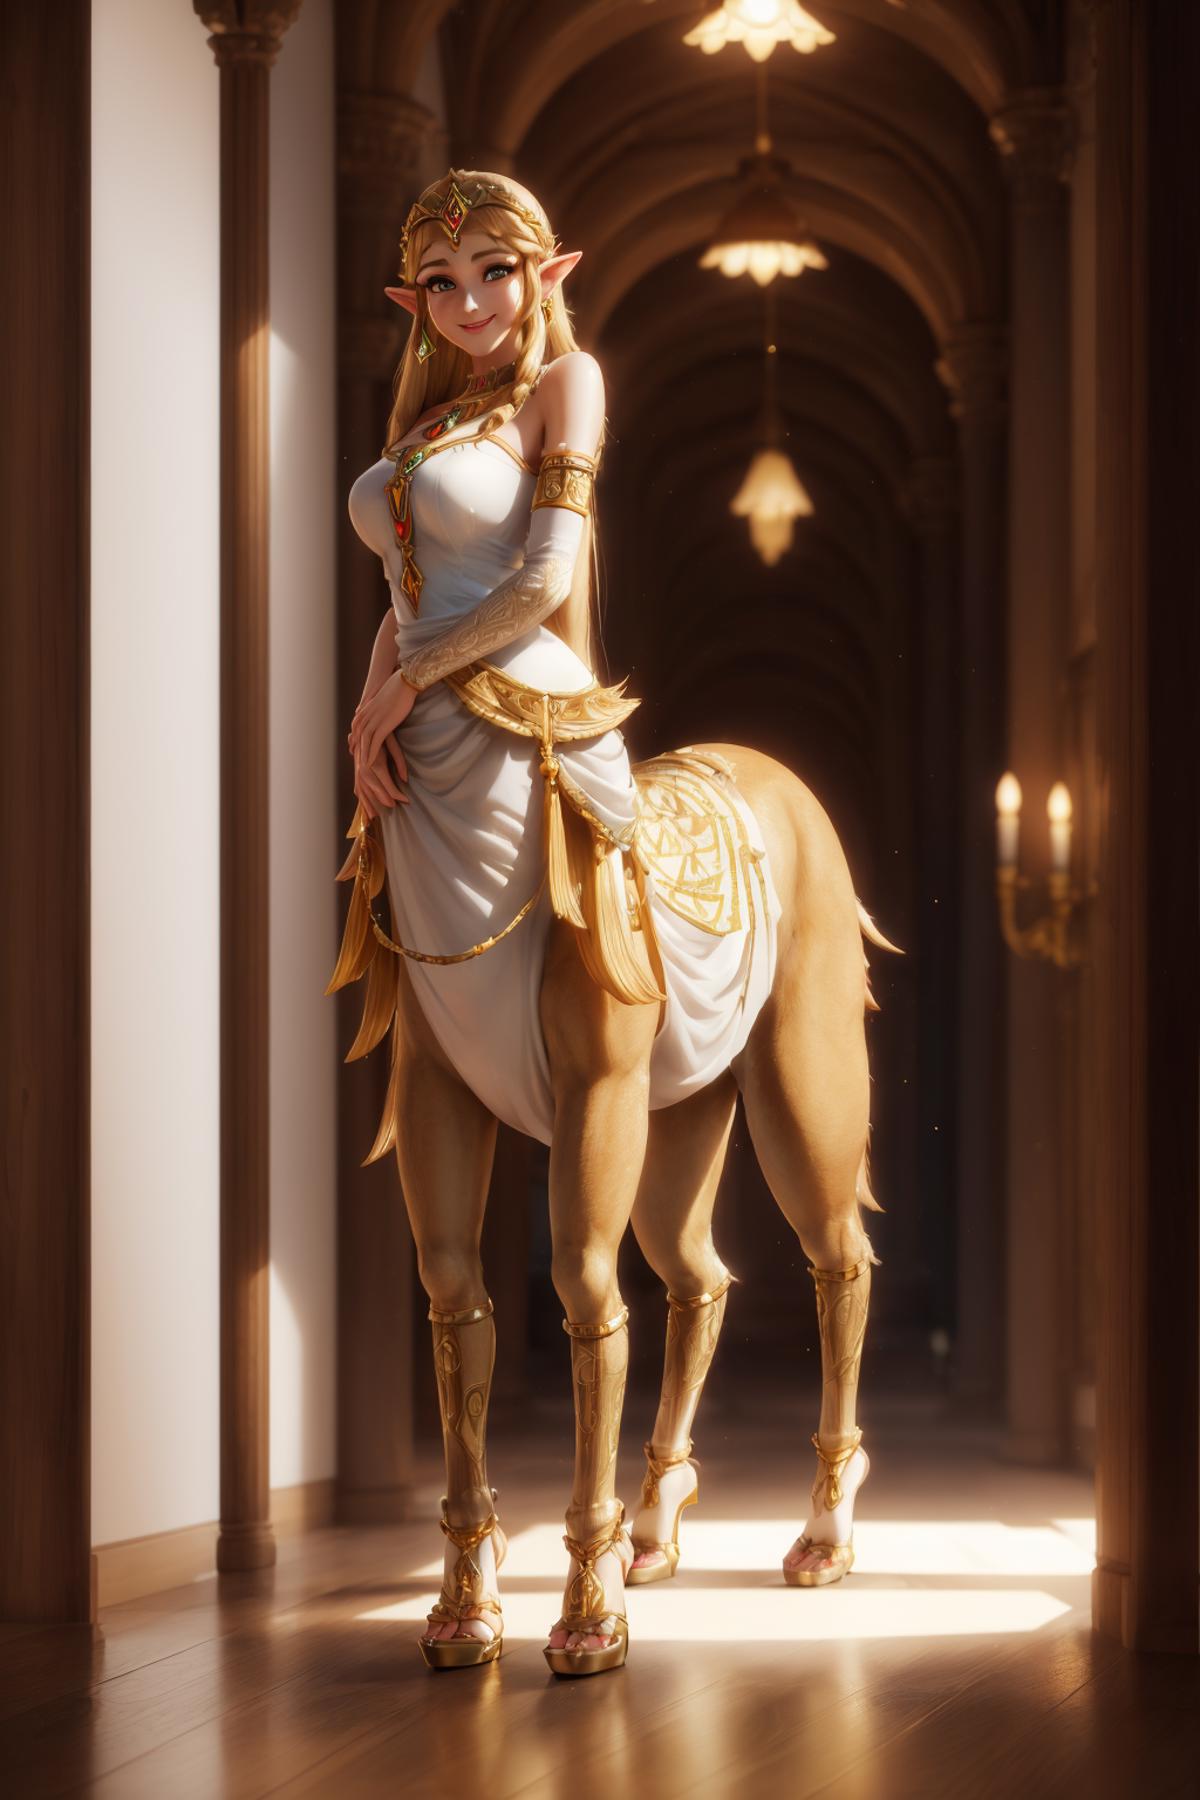 A 3D animated woman standing next to a horse.